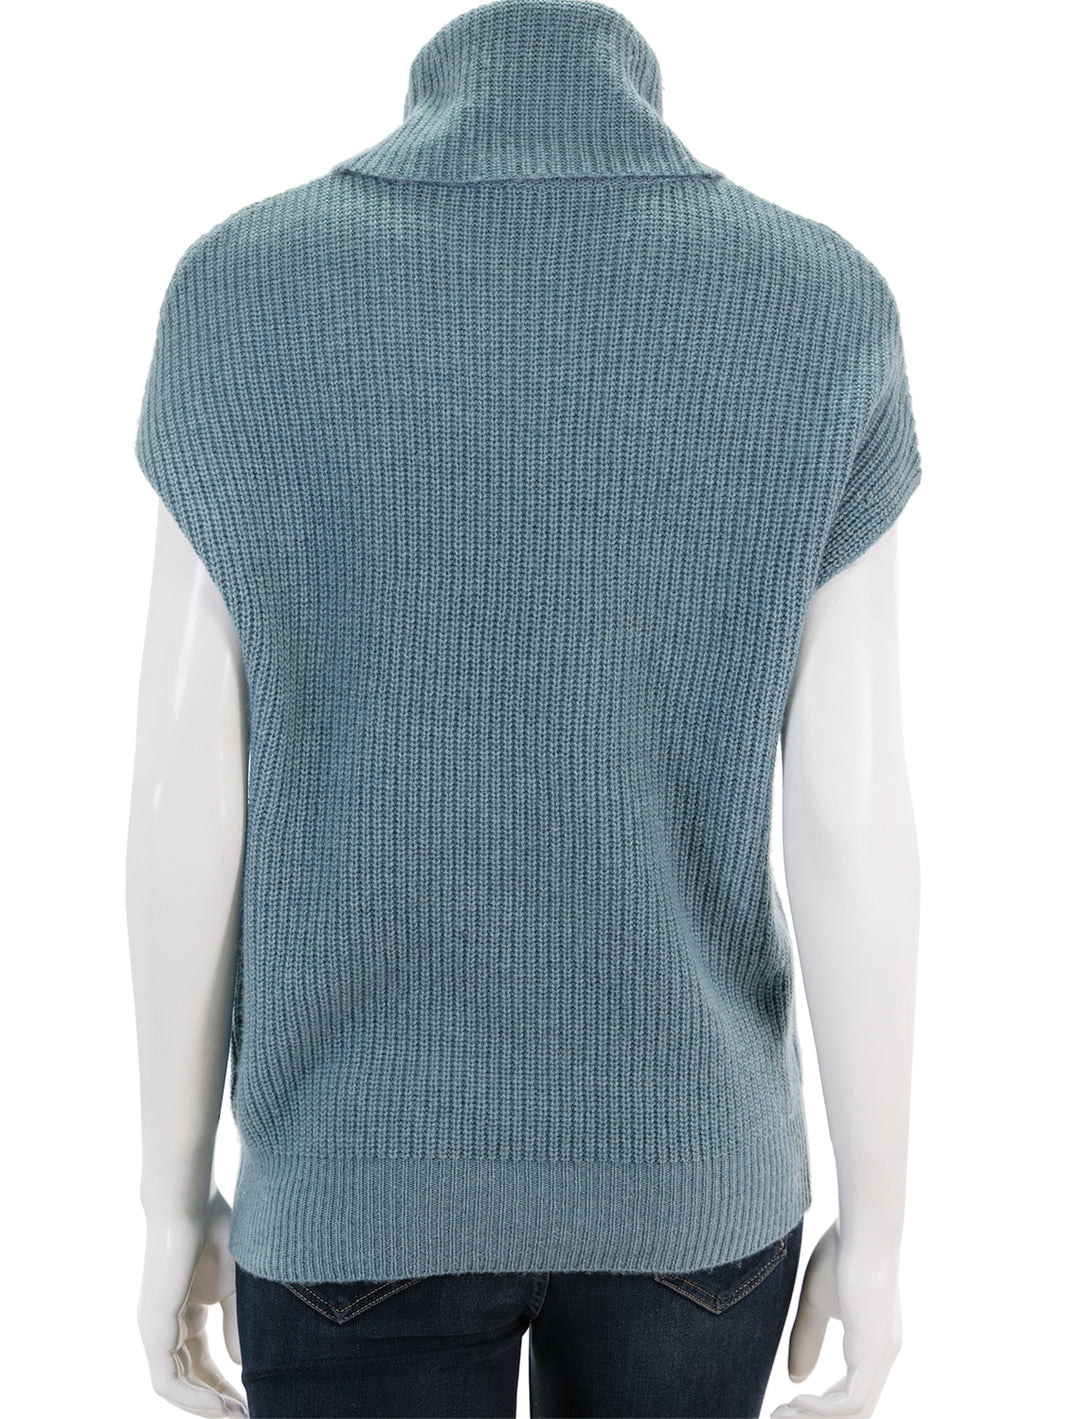 Back view of Lilla P.'s ribbed turtleneck sweater in nautilus.